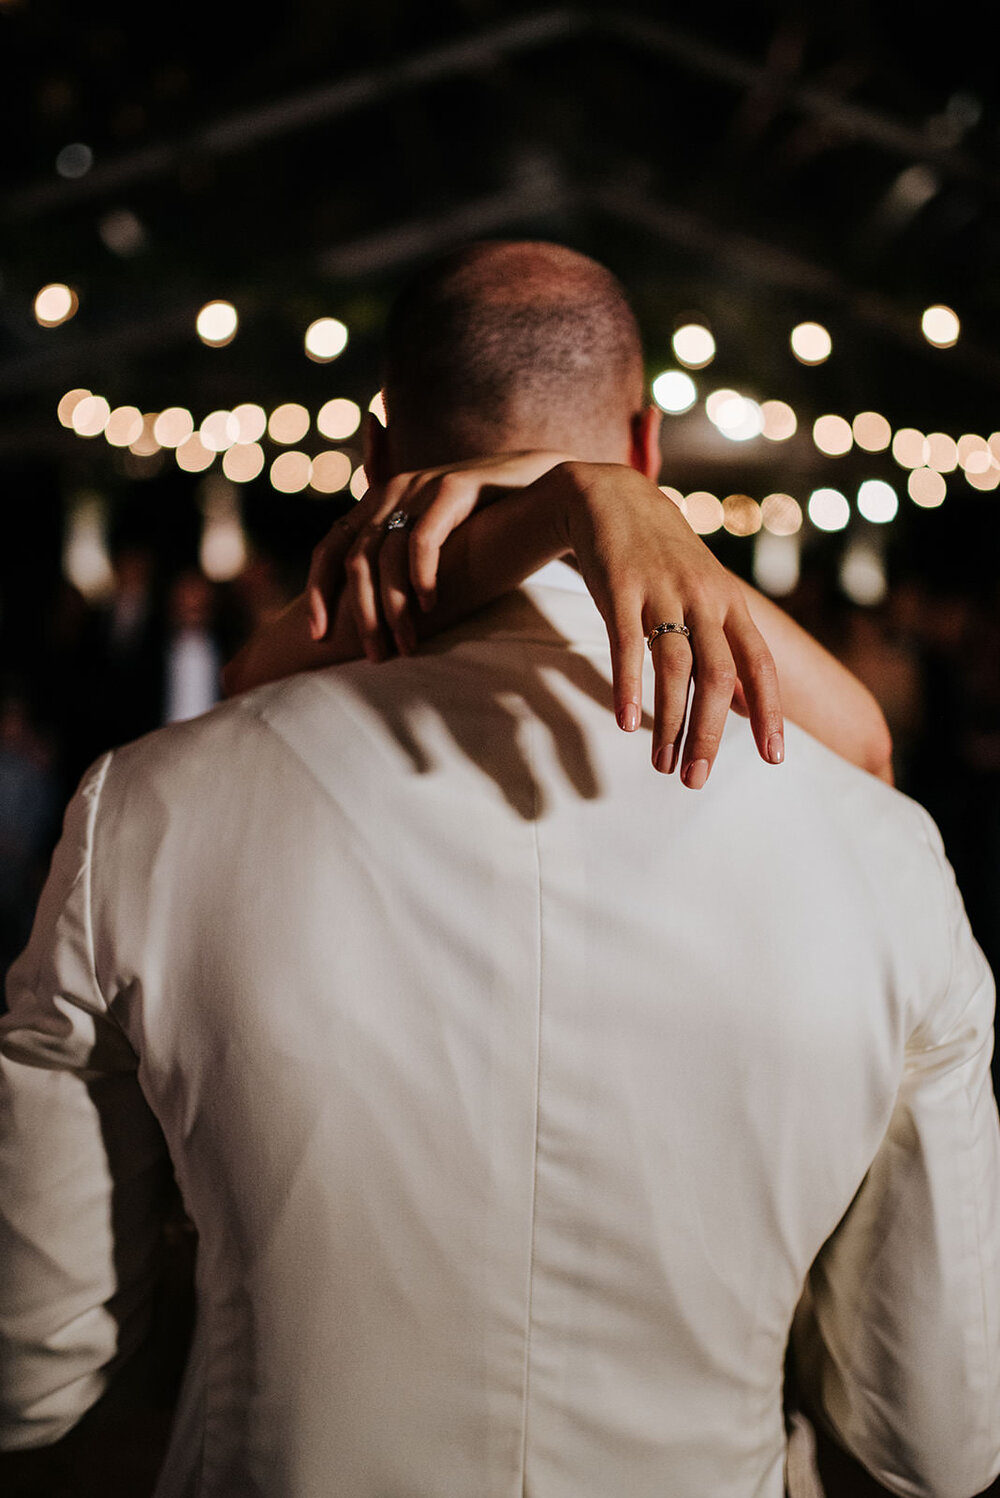 Photograph of the back of the groom with bride's hands resting elegantly slightly over his shoulders during first dance at wedding in Puerto Rico